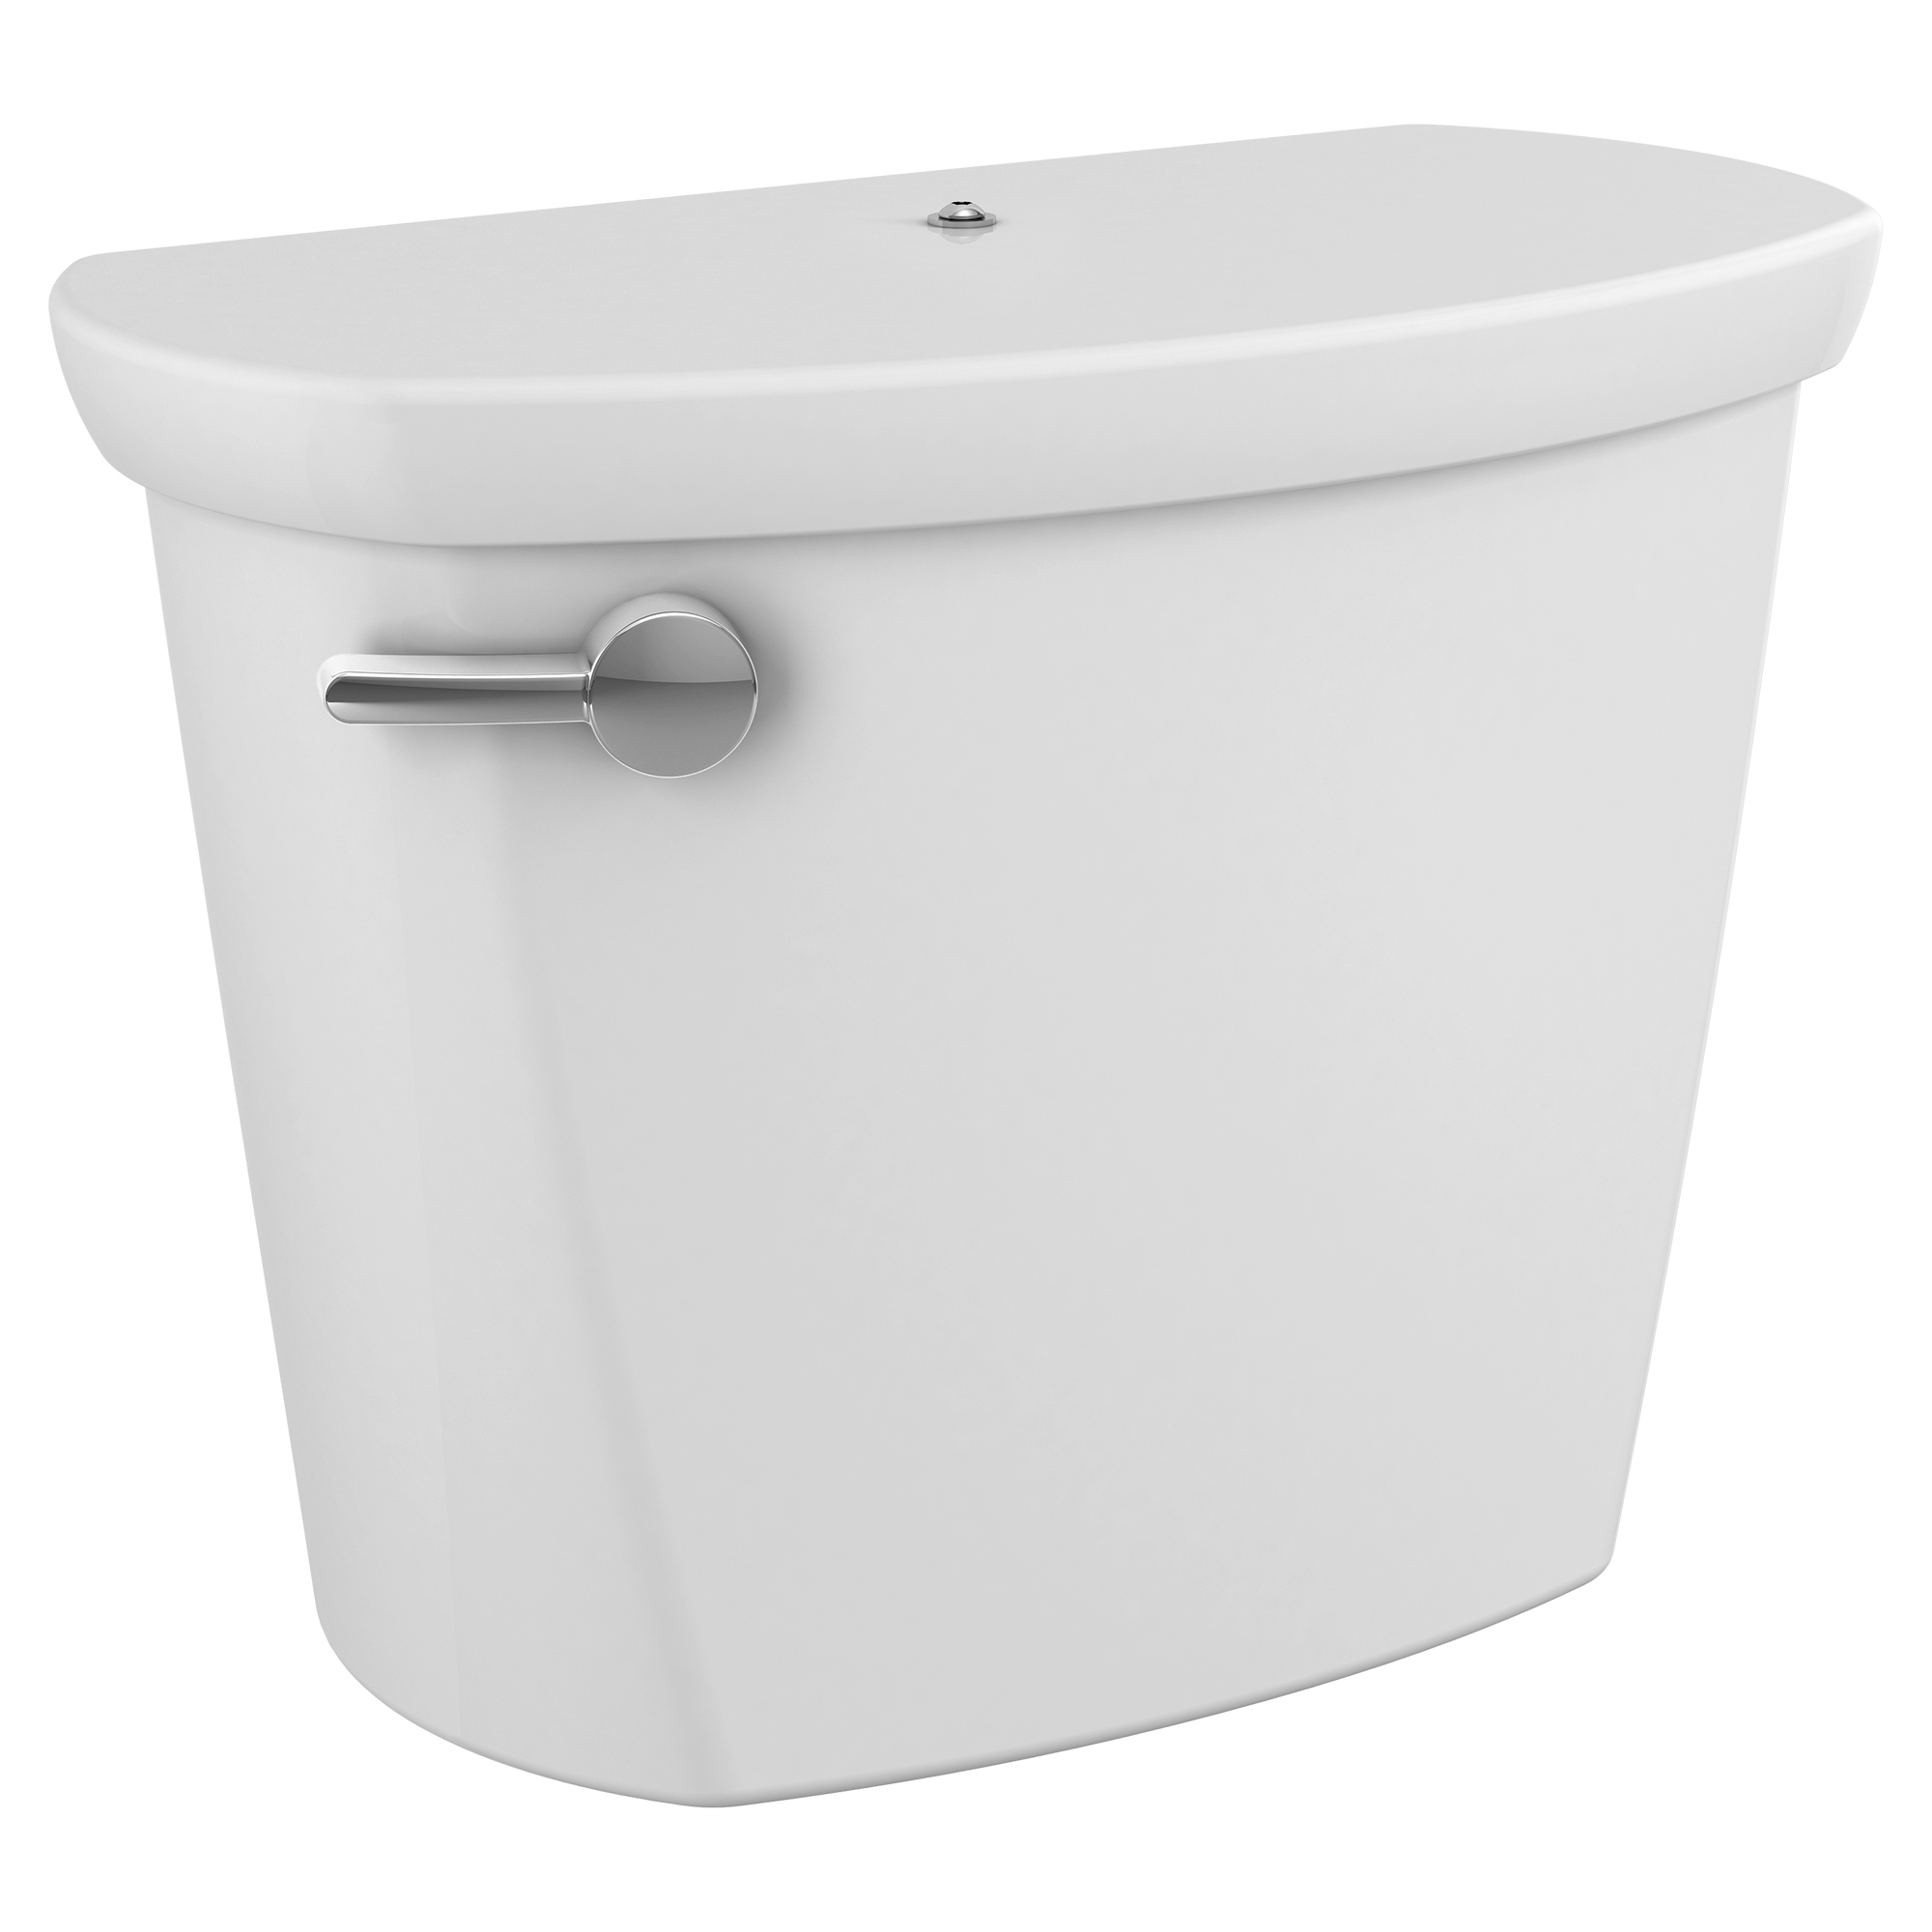 Cadet™ PRO 1.28 gpf/4.0 Lpf 14-Inch Toilet Tank with Tank Cover Locking Device